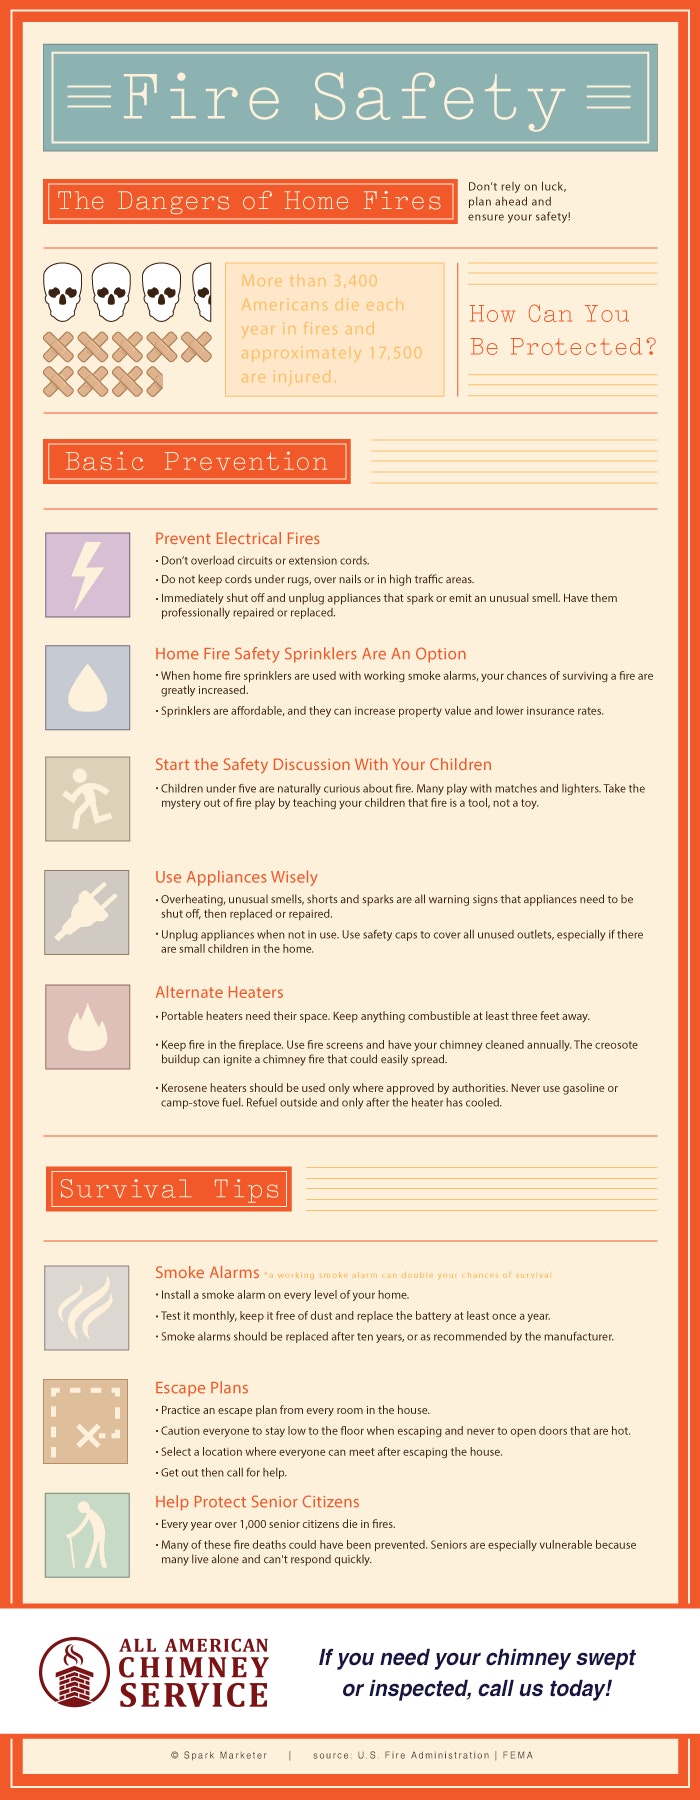 Fire Safety Infographic Louisville Ky All American Chimney Service